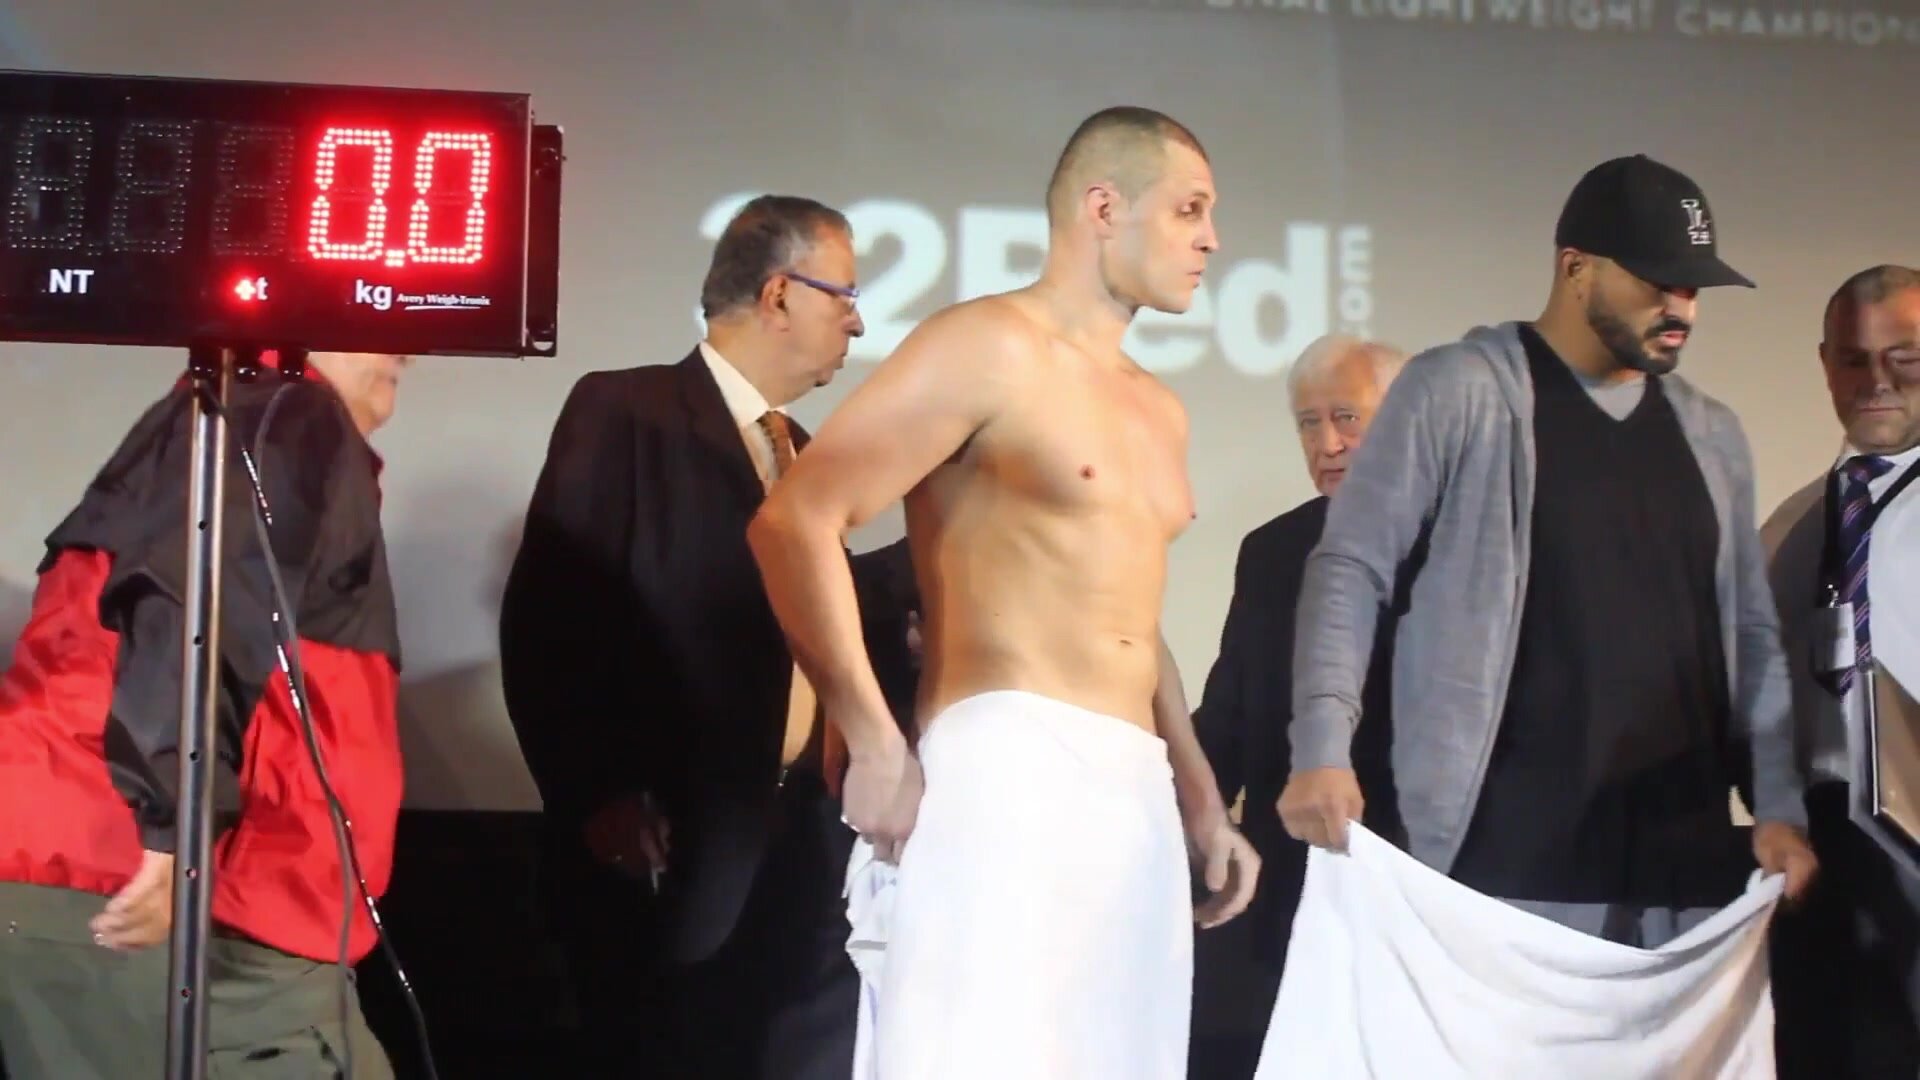 Cheeky cock flash at the weigh-in